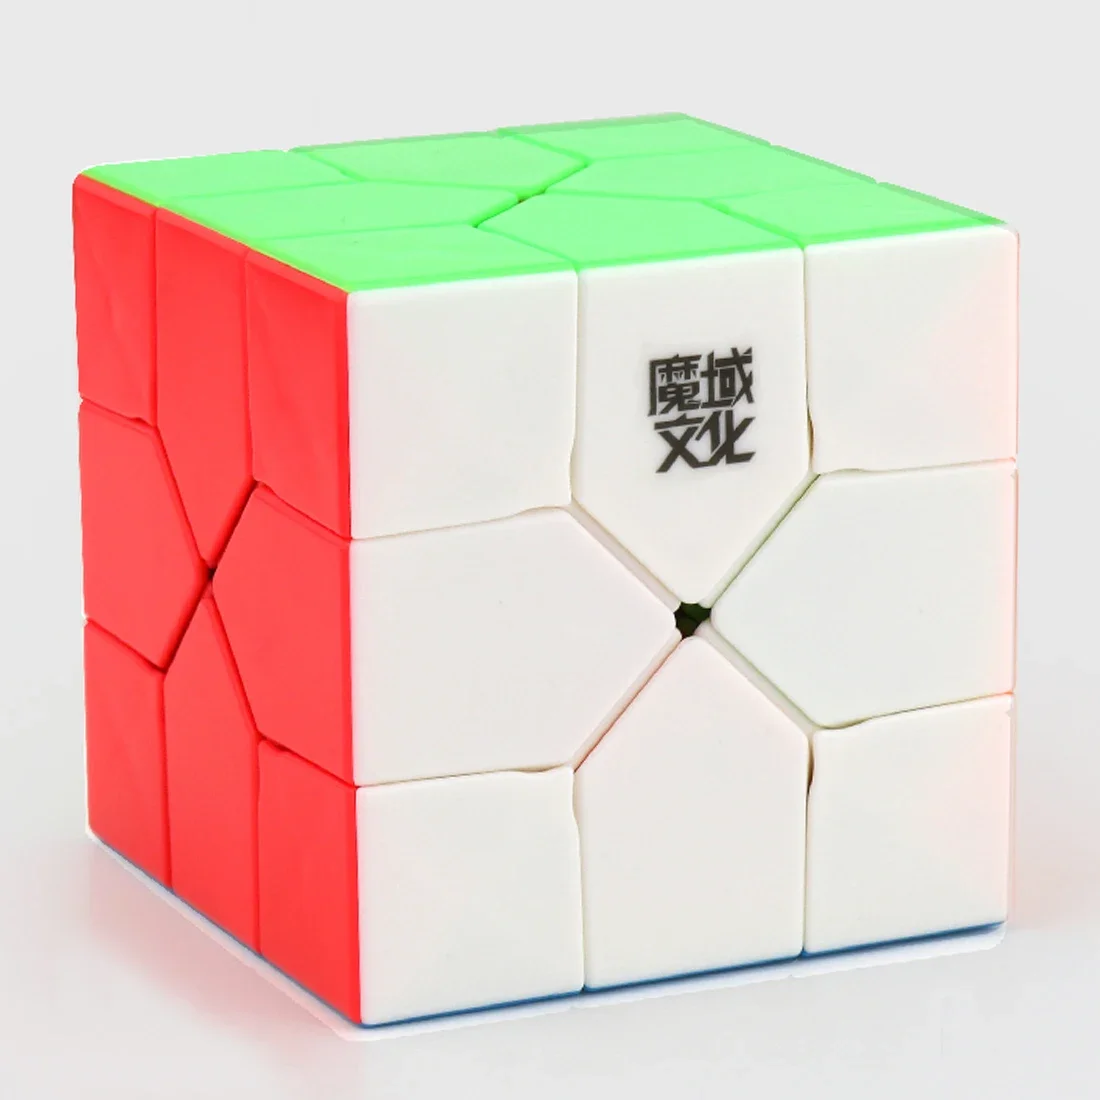 

MoYu Redi Cube Professional Design Anomaly 3x3 Magic Cube Puzzle Toys for Challenging Colorized Strange Shape Kids Toys